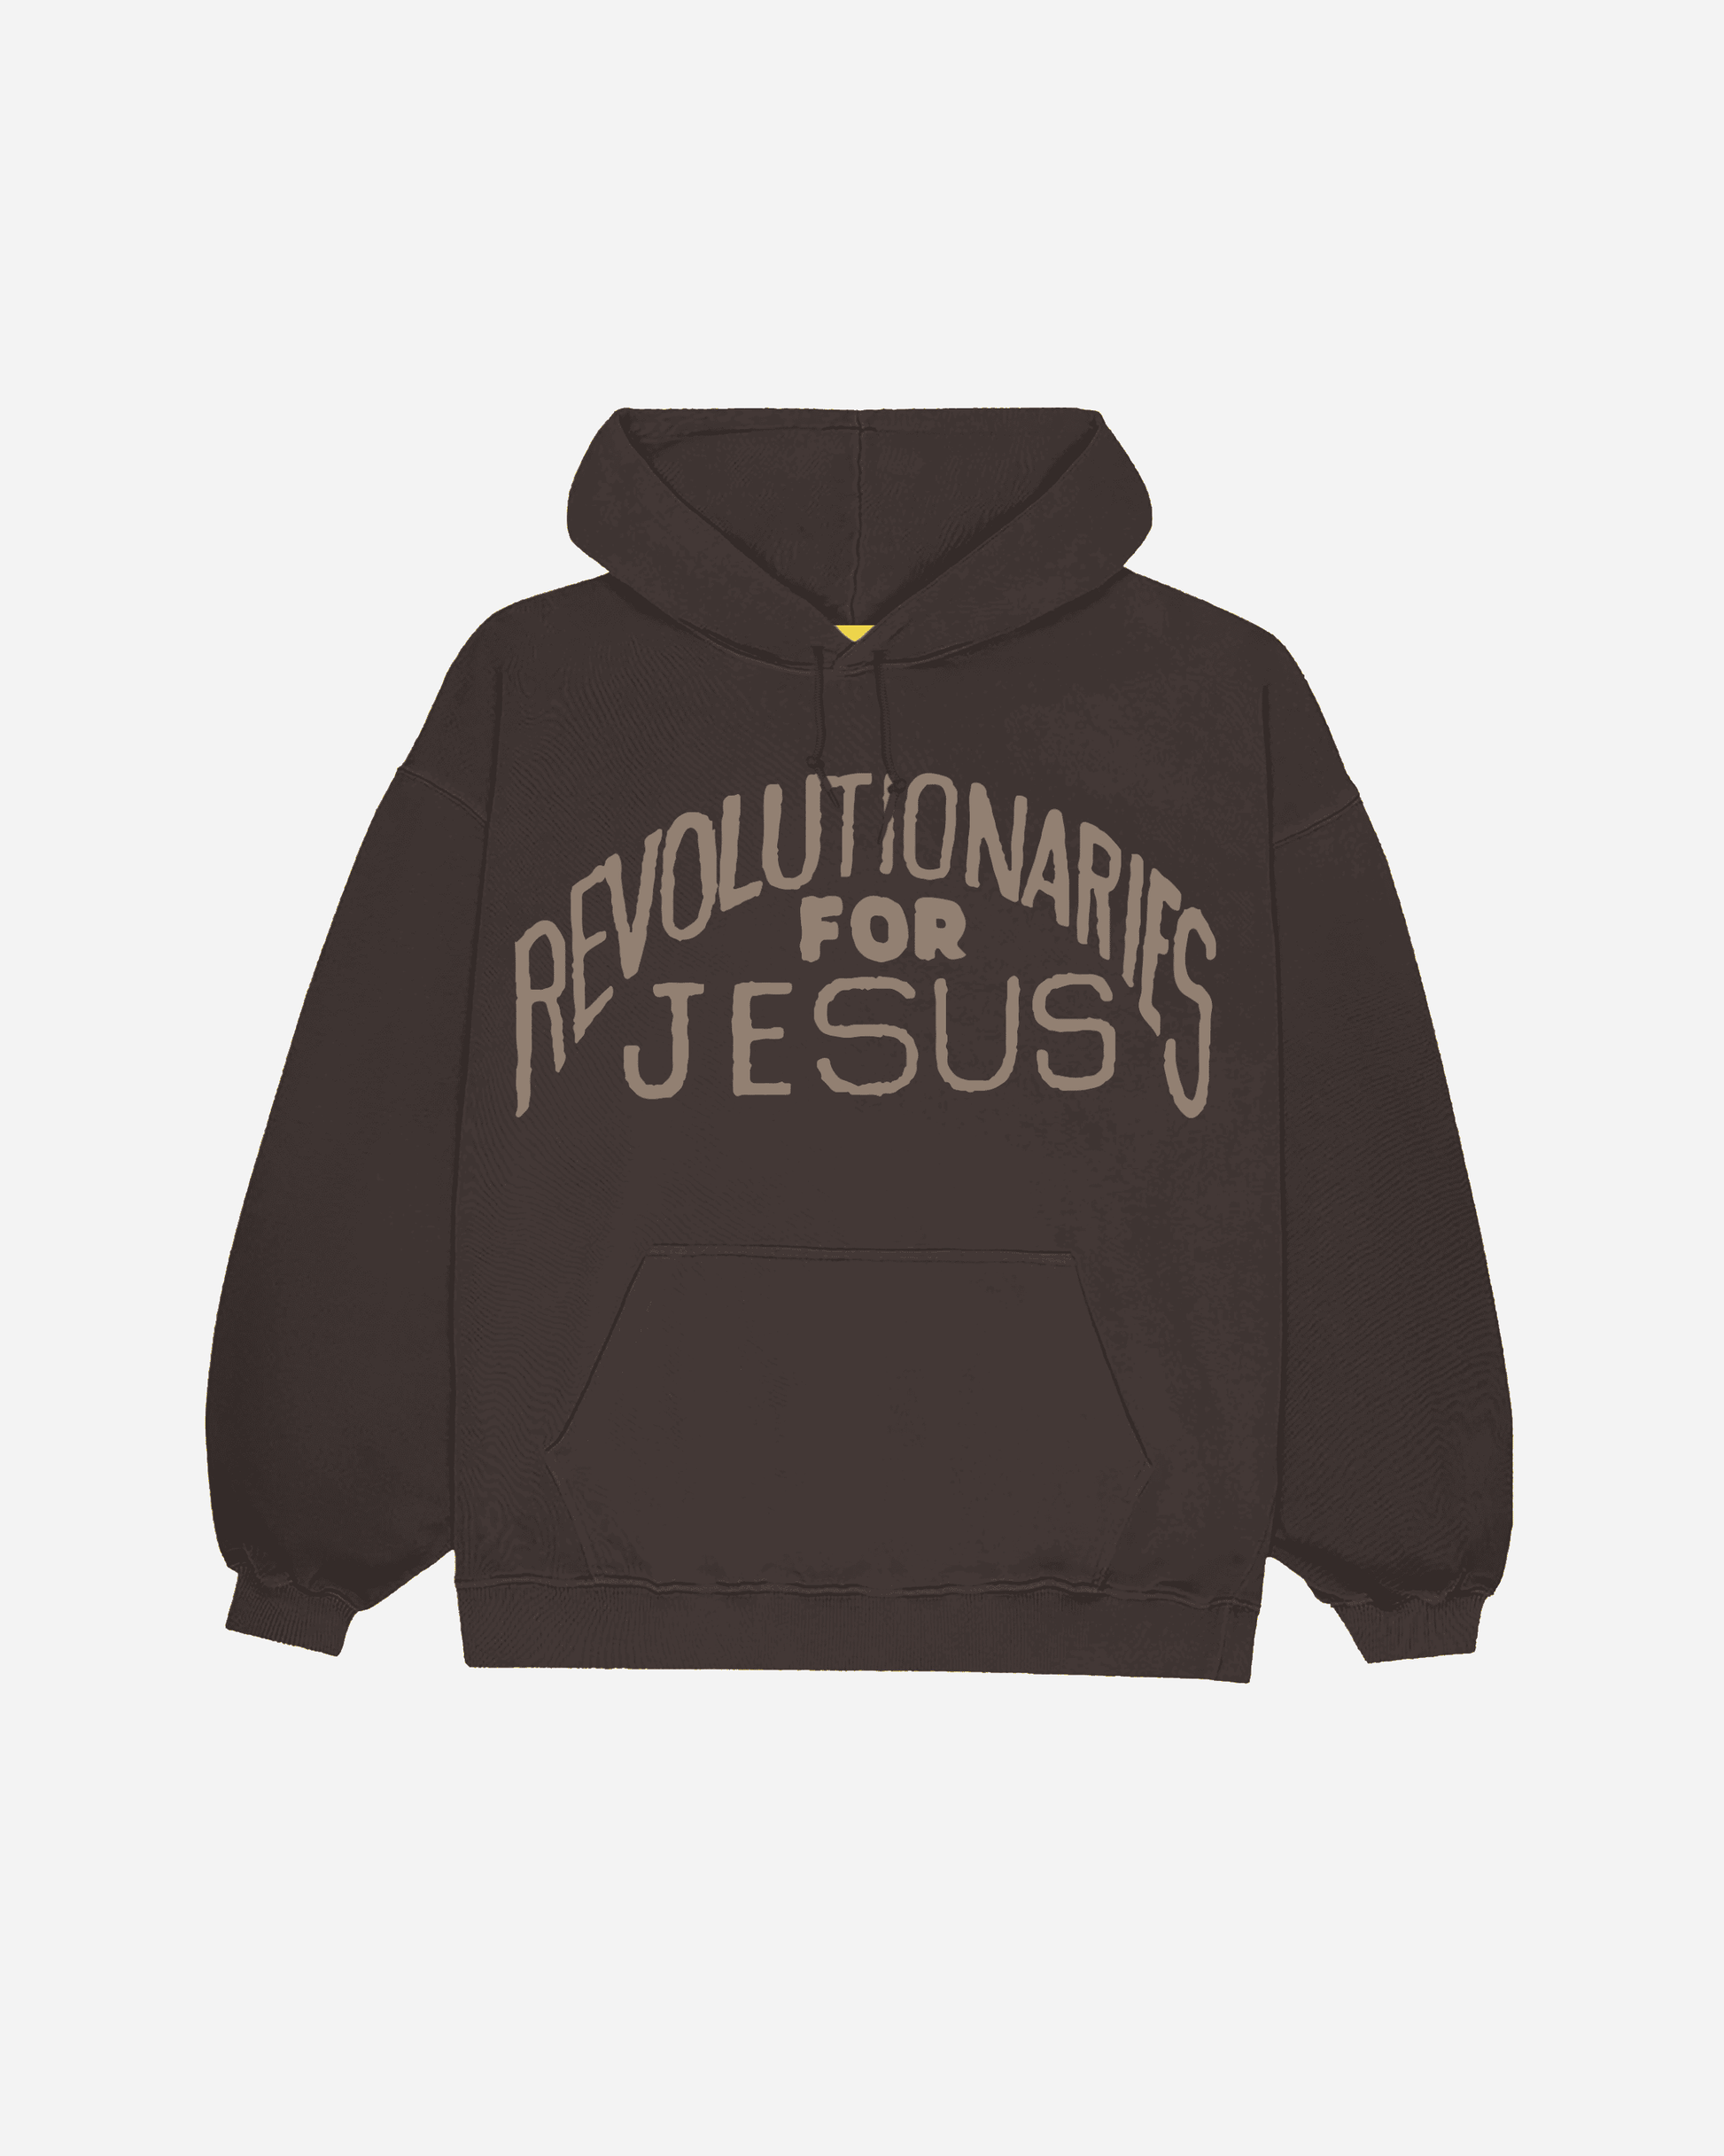 "Revolutionaries for Jesus" Christian Hoodie Sweatshirt for the modern day Jesus People movement. New take on a vintage classic. Made in the USA by NHIM Apparel Christian clothing brand